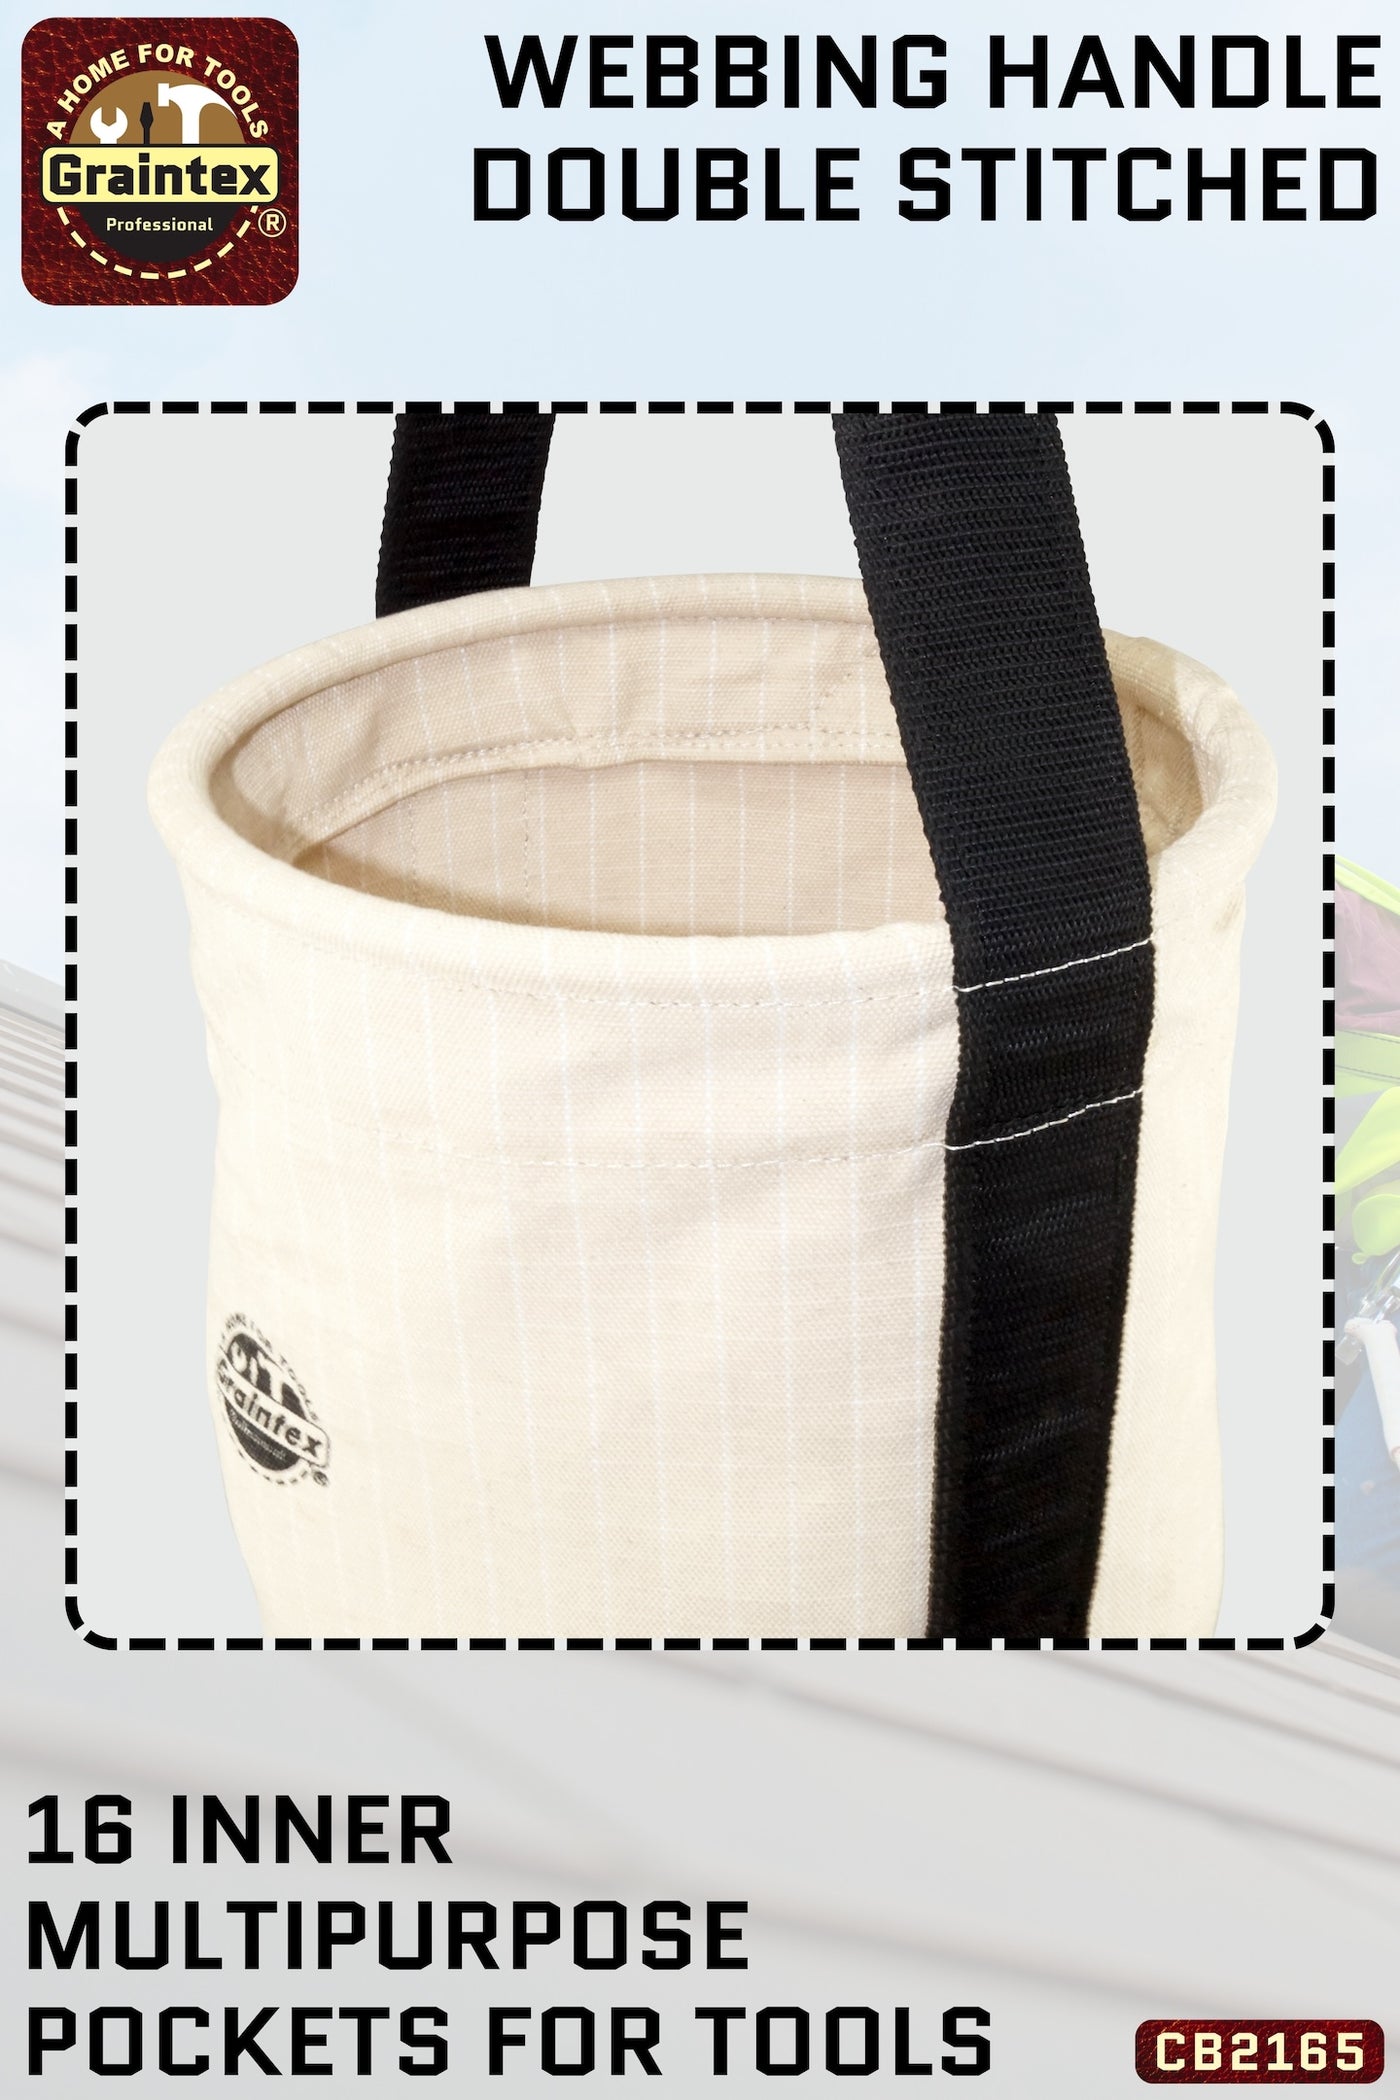 CB2165 :: UTILITY TAPERED CANVAS BUCKET LEATHER BOTTOM 16 INNER POCKETS 12”X10”X14” WEBBING HANDLE WITH SWIVEL SNAP HOOK